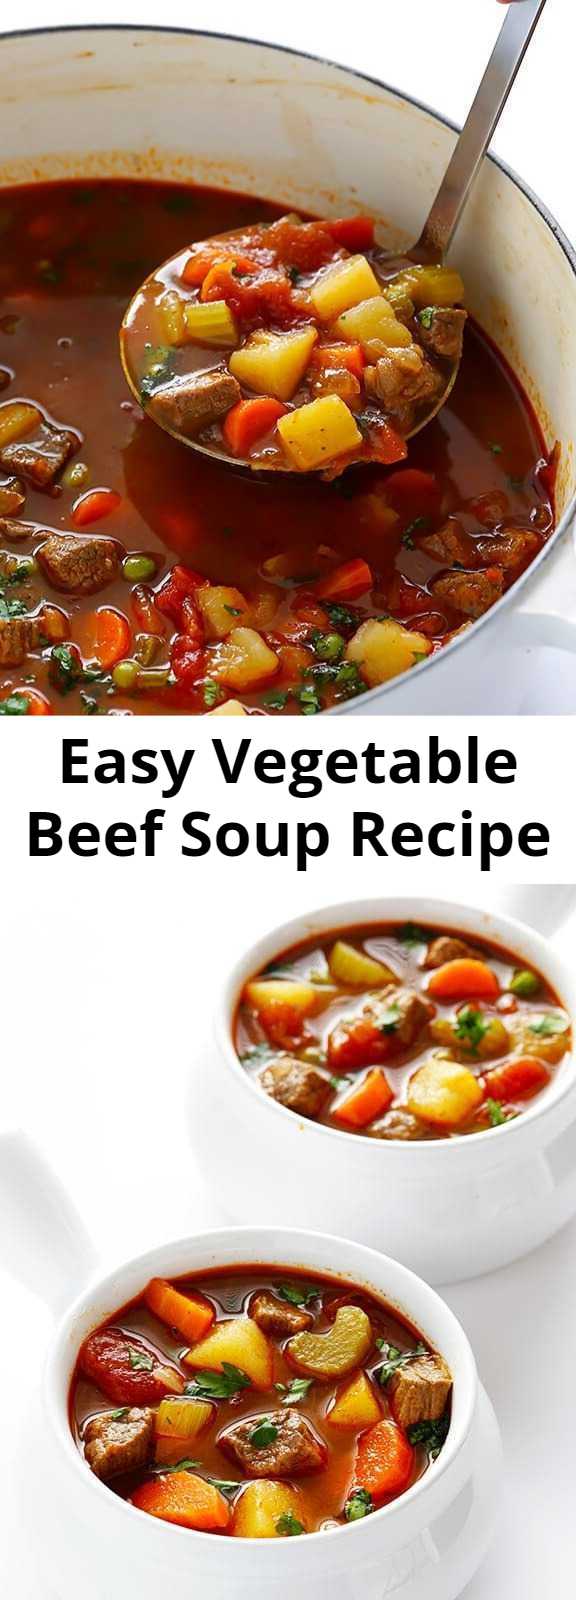 Easy Vegetable Beef Soup Recipe - This vegetable beef soup recipe is a classic — full of tender steak, lots of veggies, and delicious flavor! Especially on freezing cold winter days, it always hits the spot.